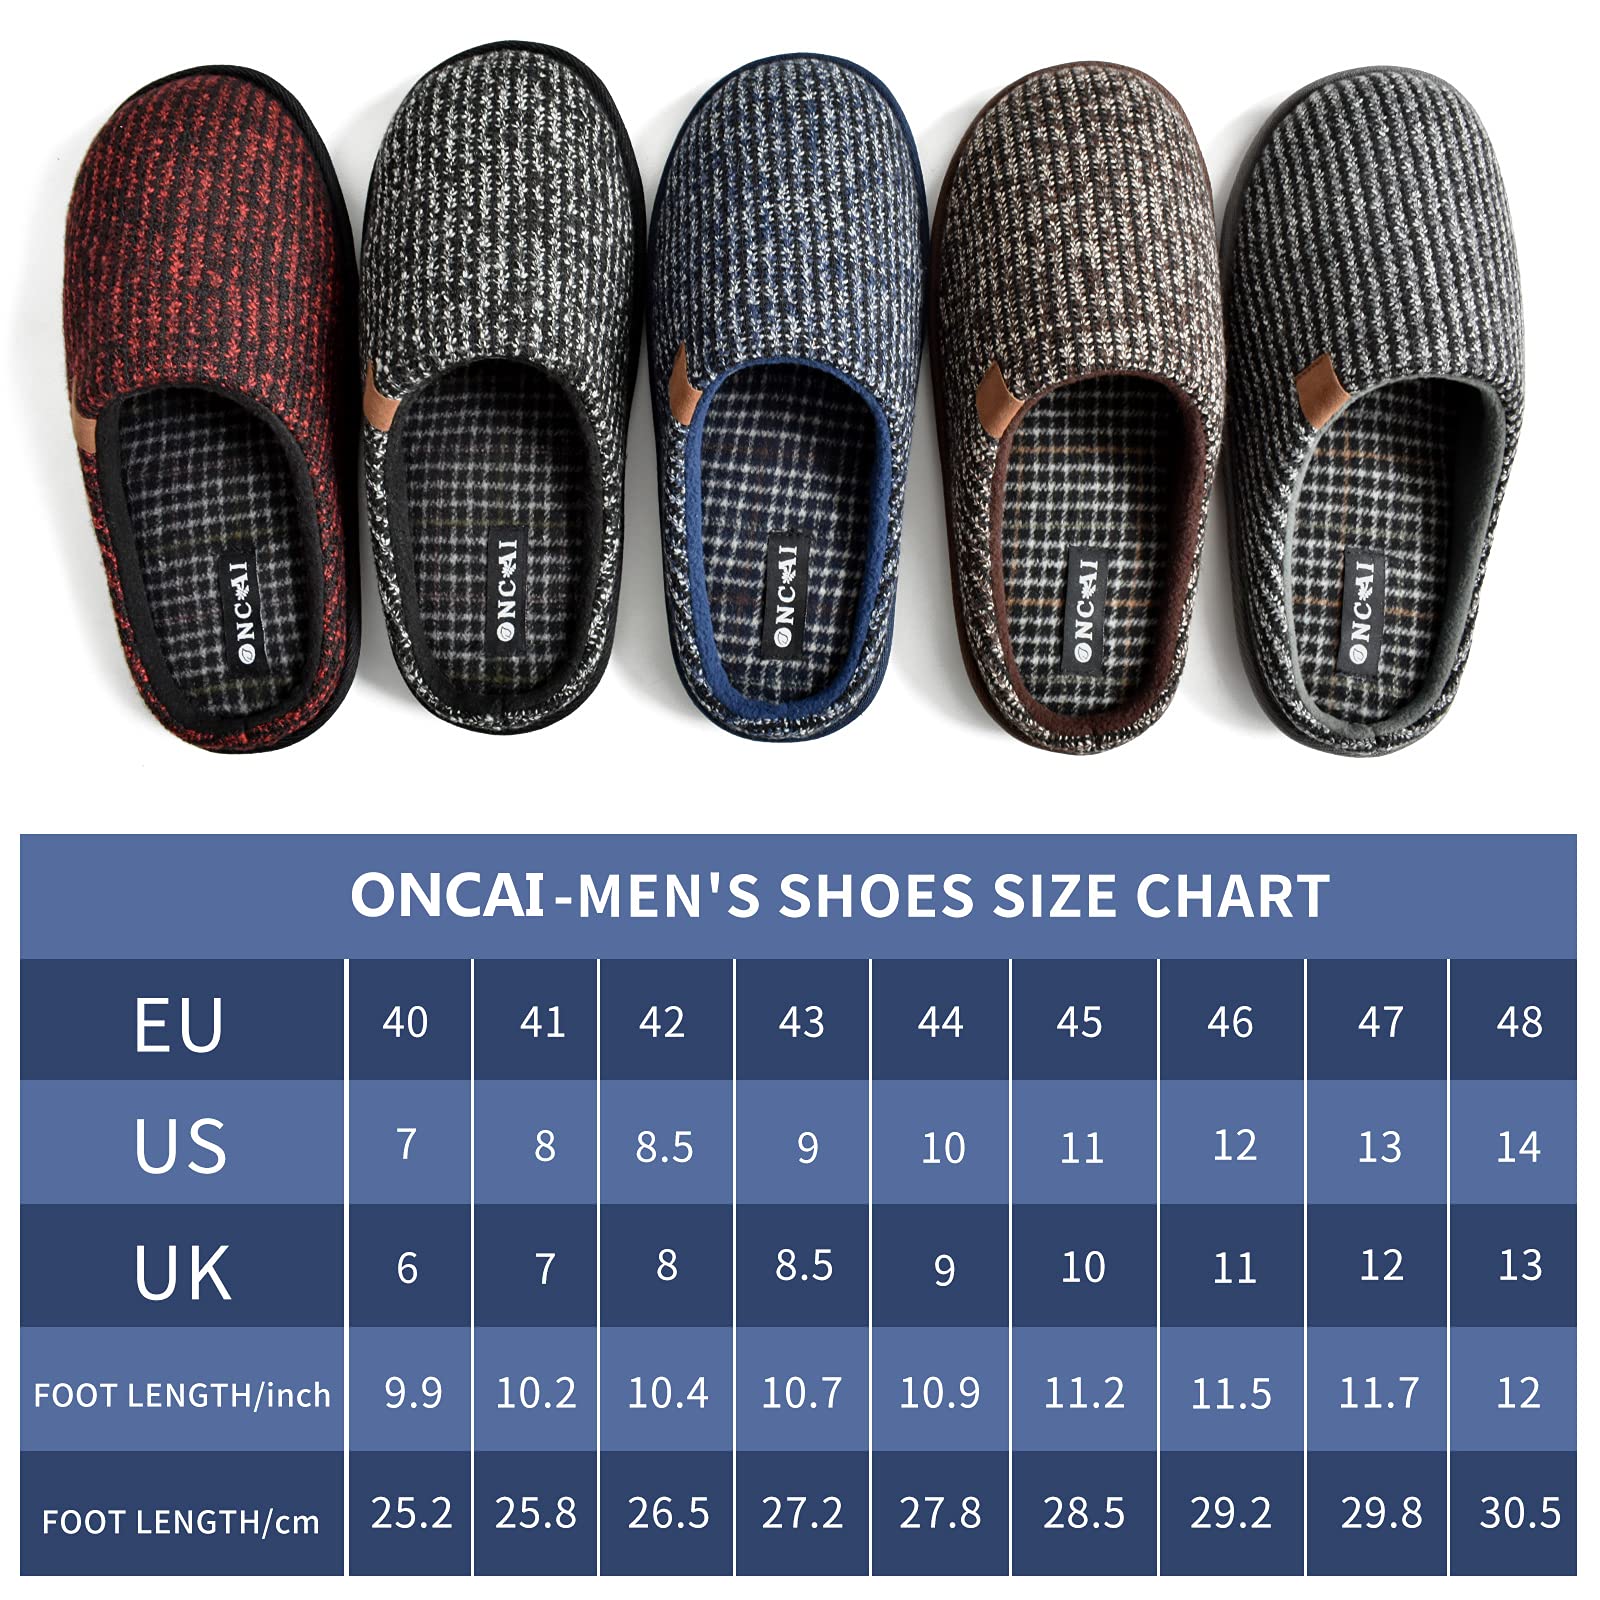 ONCAI Mens Slippers Cozy Memory Foam scuff Slippers Slip On Warm House Shoes Indoor/Outdoor With Best Arch Surpport Size 7-13